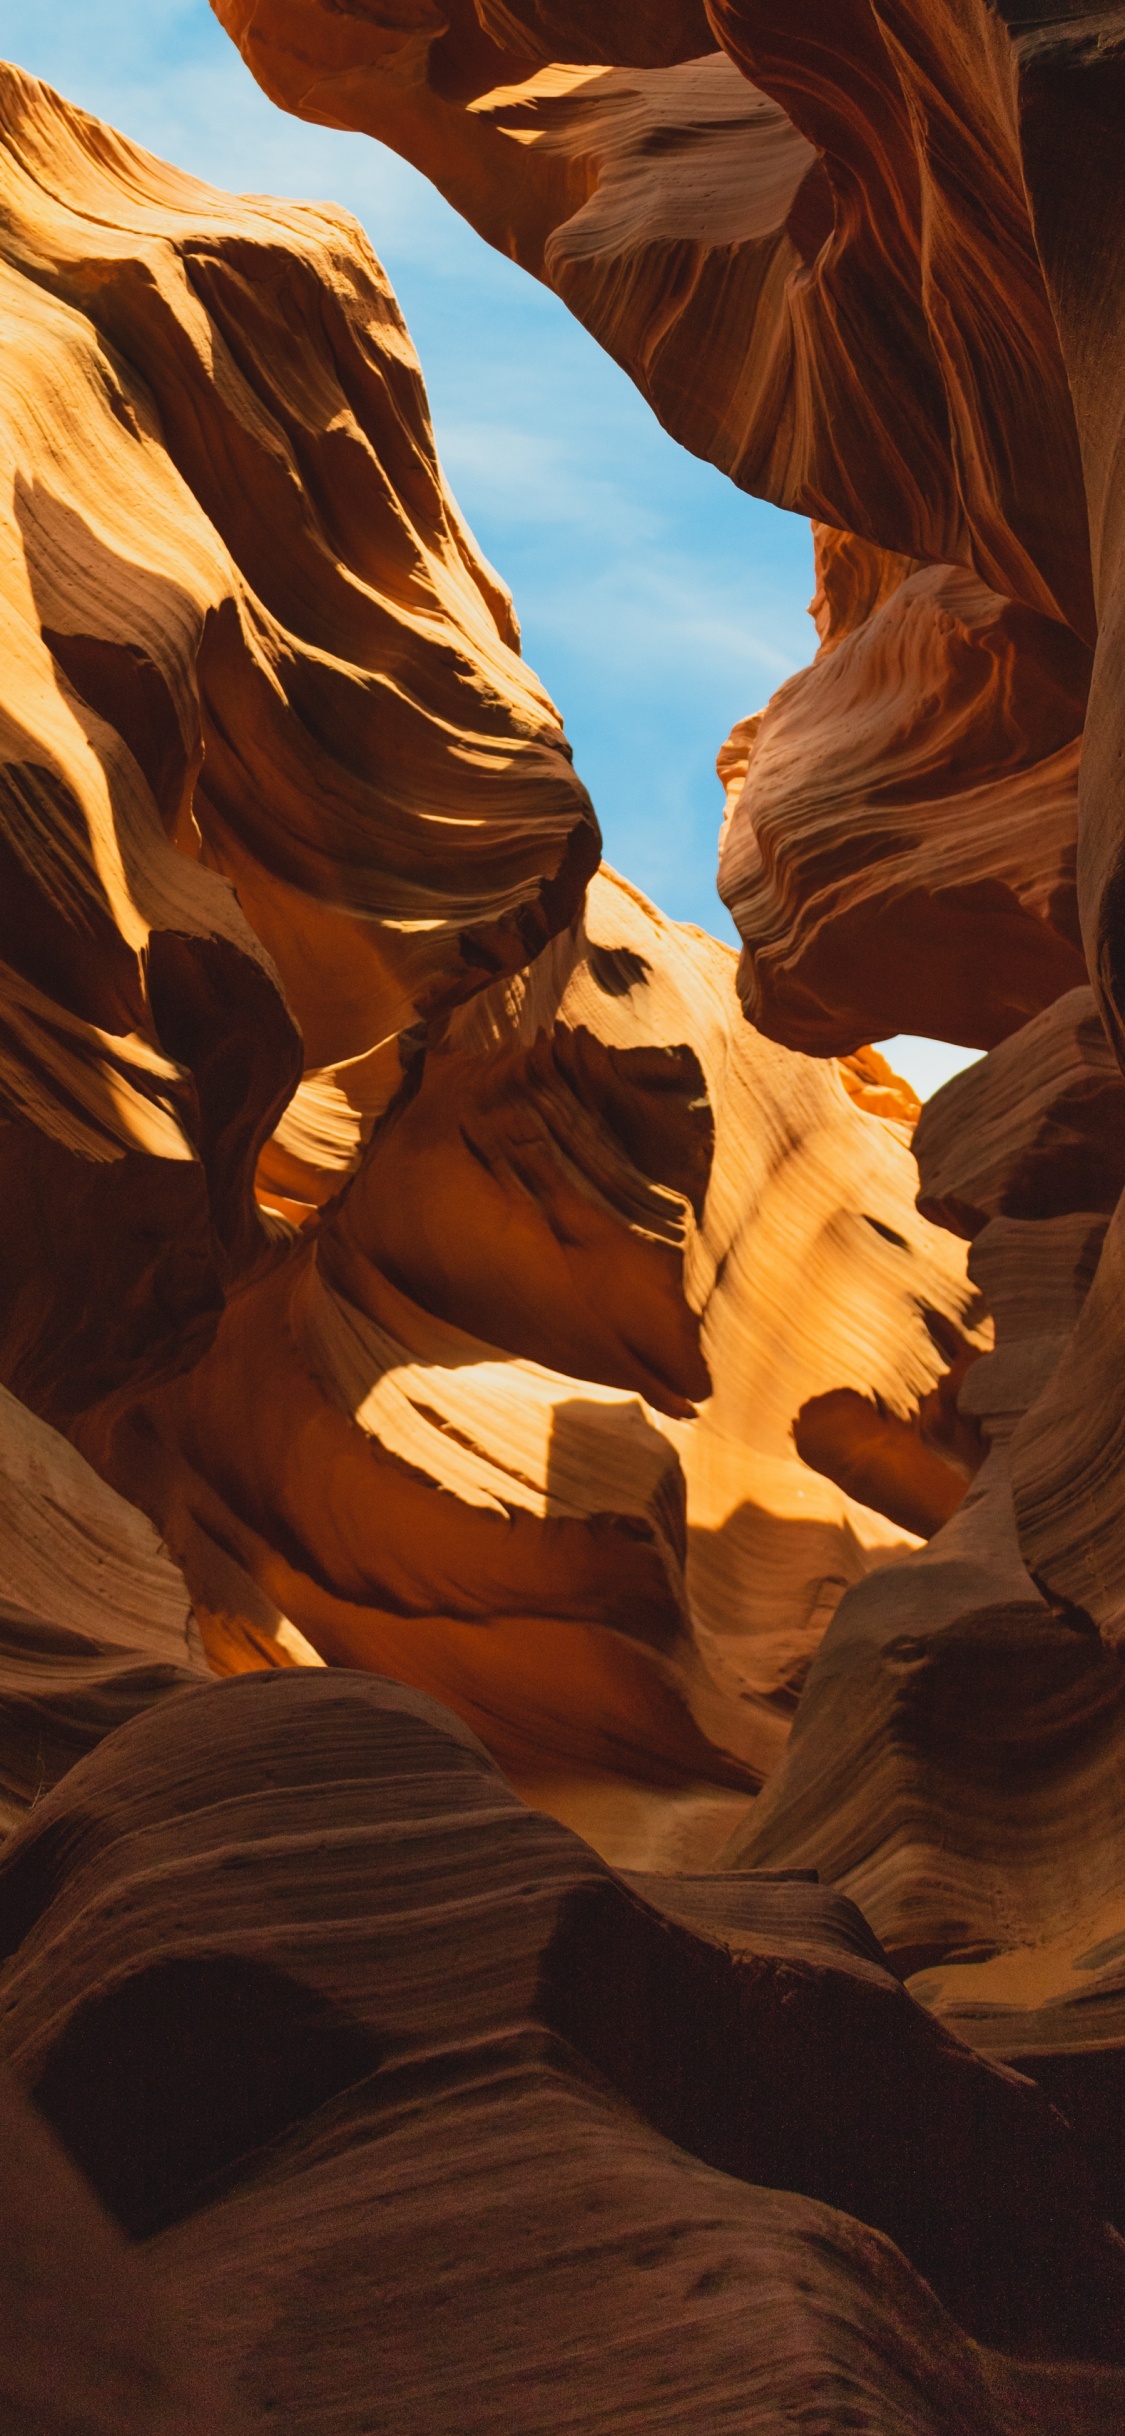 Brown Rock Formation During Daytime. Wallpaper in 1125x2436 Resolution